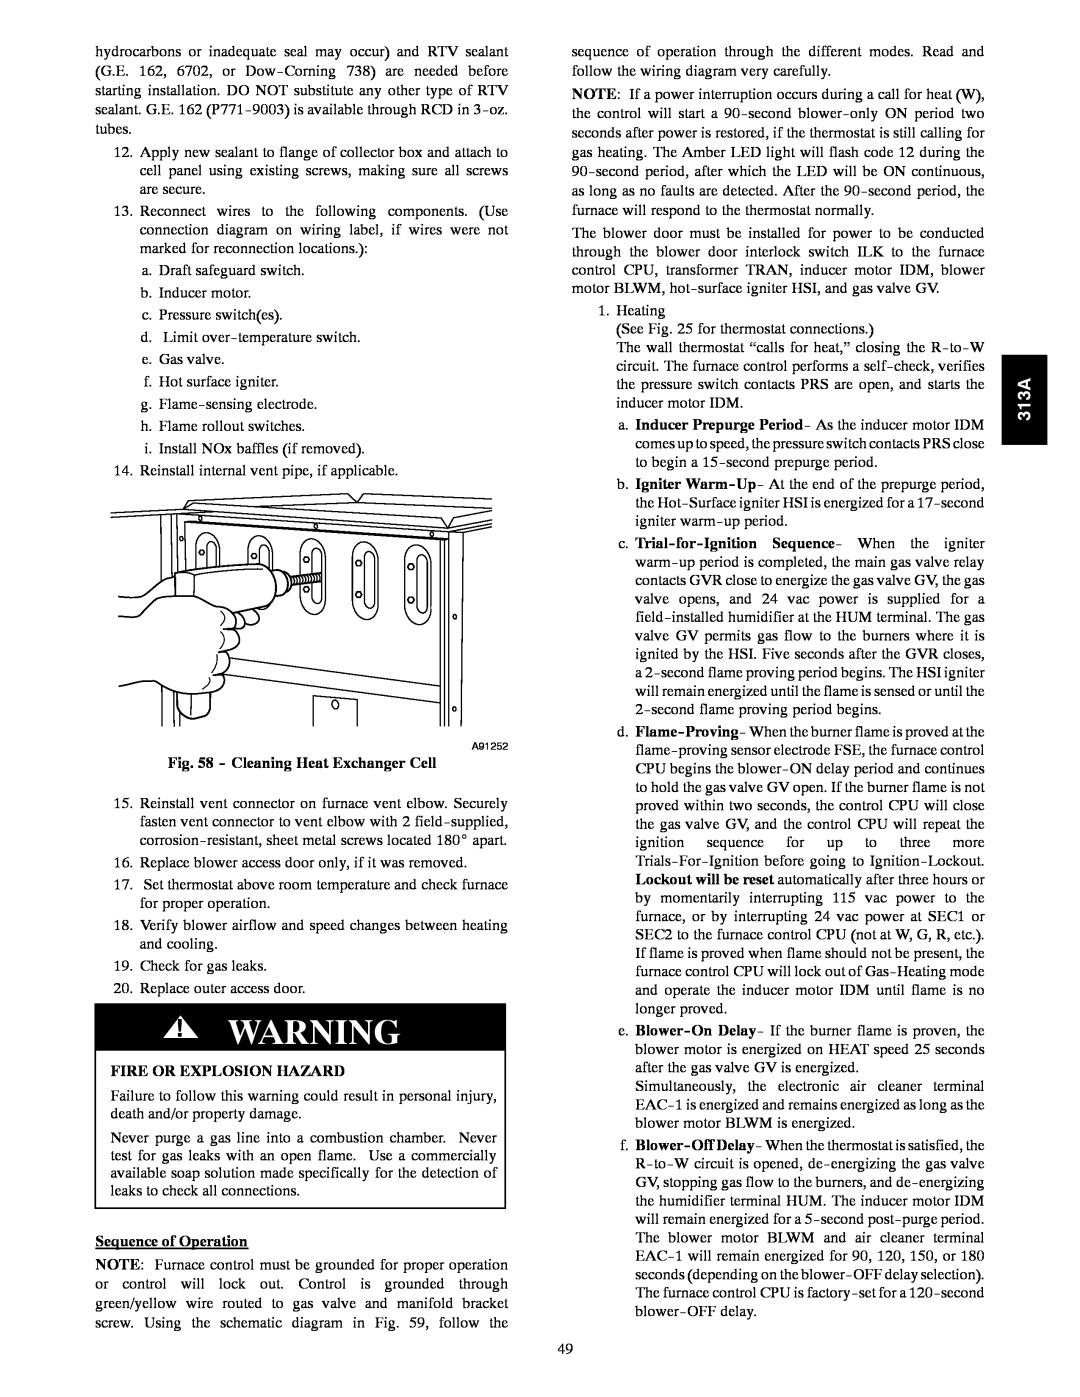 Bryant 313AAV instruction manual Cleaning Heat Exchanger Cell, Fire Or Explosion Hazard, Sequence of Operation 